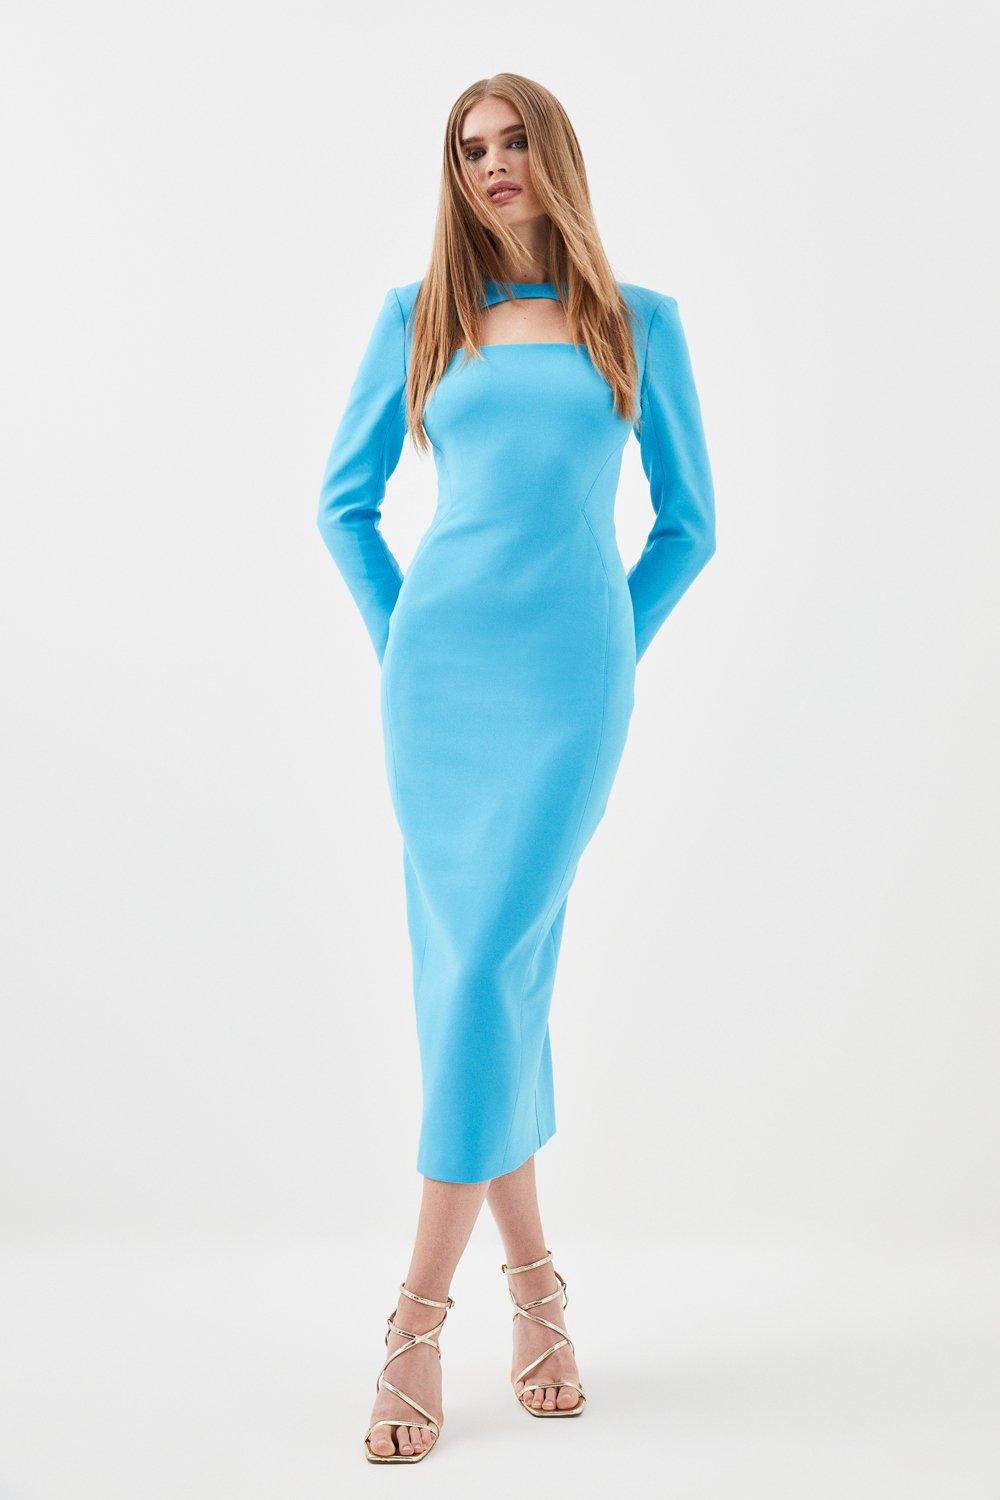 Tall Compact Stretch Cut Out Sleeved Pencil Dress